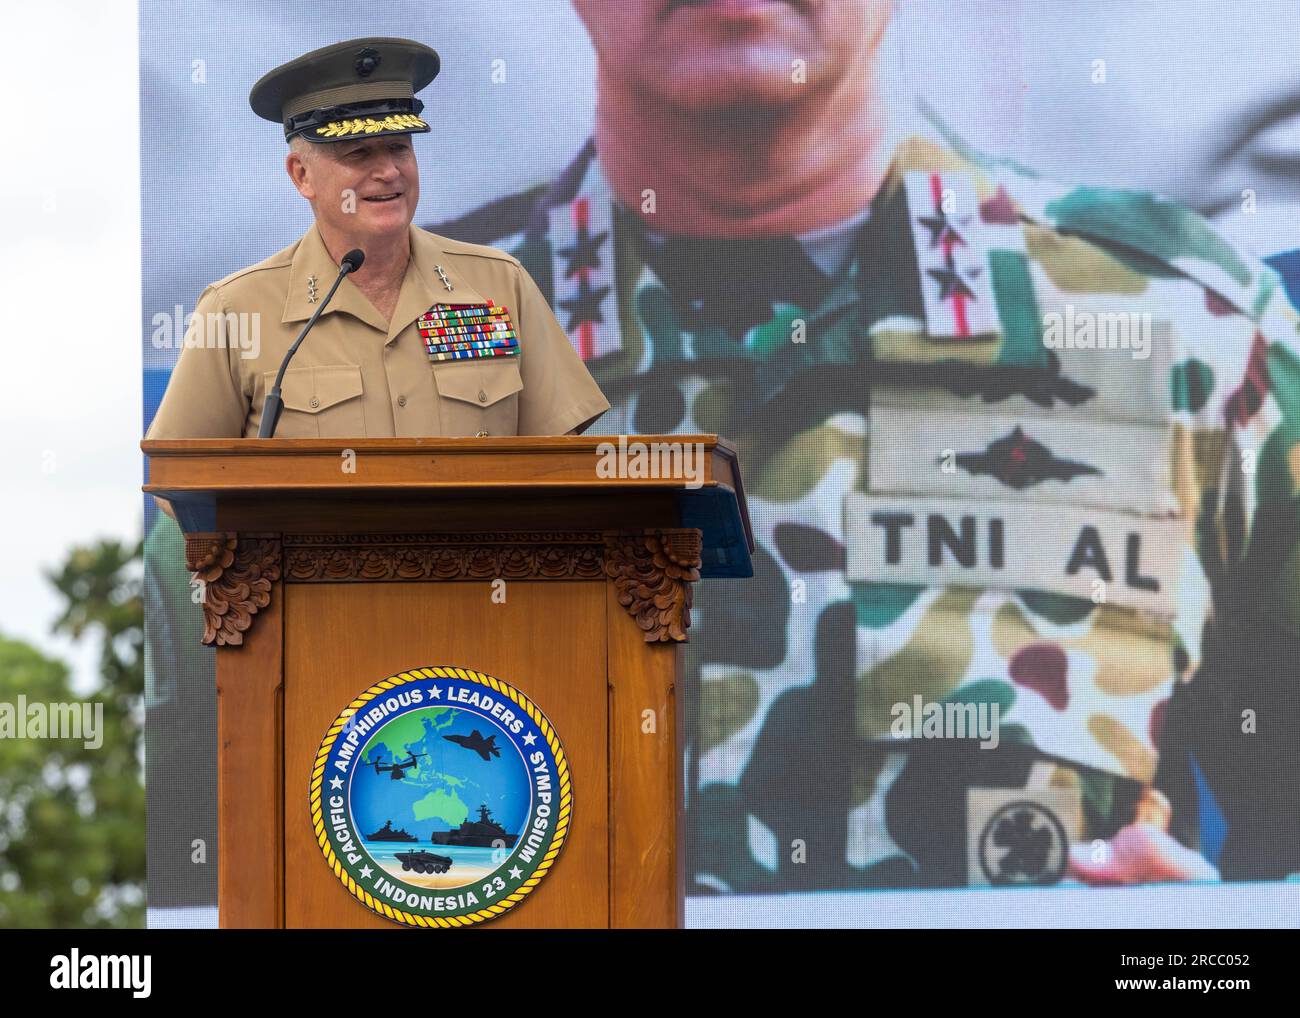 Denpasar, Indonesia. 13th July, 2023. U.S. Marine Corps Lt. Gen. William Jurney, commander, U.S. Marine Corps Forces Pacific, delivers remarks at the conclusion of the Pacific Amphibious Leaders Symposium, July 13, 2023 in Denpasar, Bali, Indonesia. The symposium involved military leaders from 24 Indo-Pacific nations. Credit: Cpl. Arianna Lindheimer/U.S. Marine Corps/Alamy Live News Stock Photo